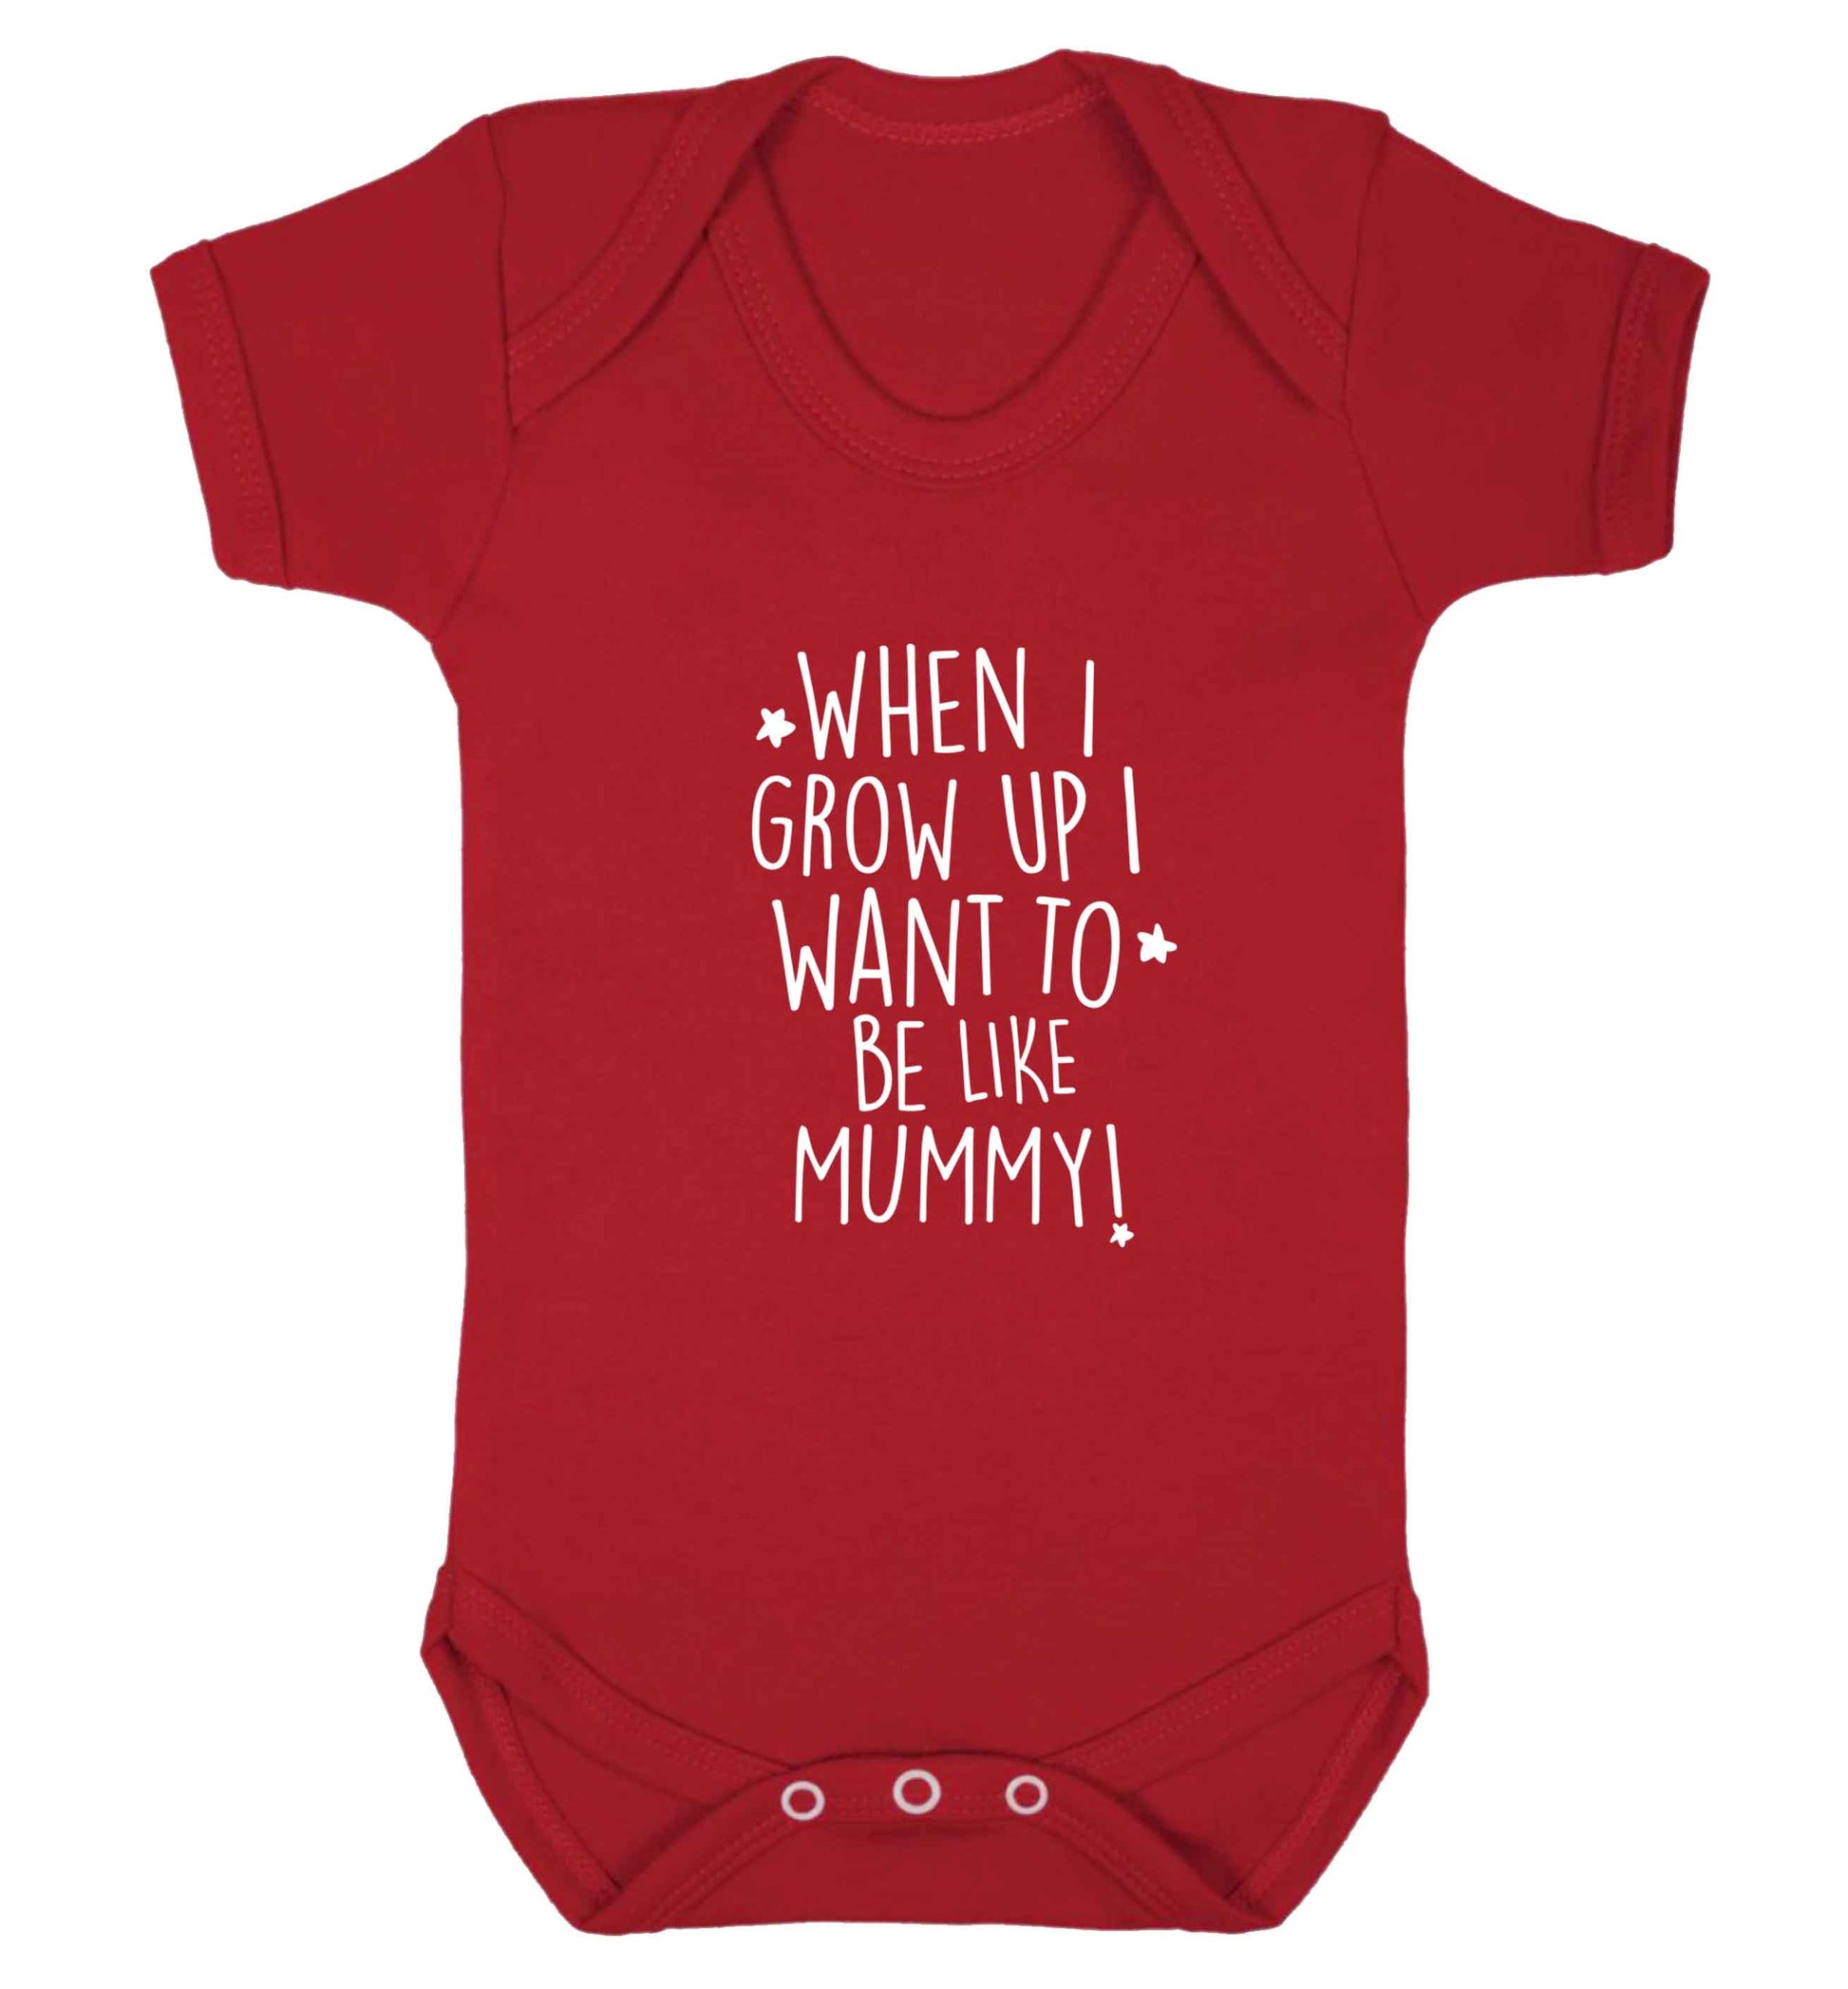 When I grow up I want to be like my mummy baby vest red 18-24 months